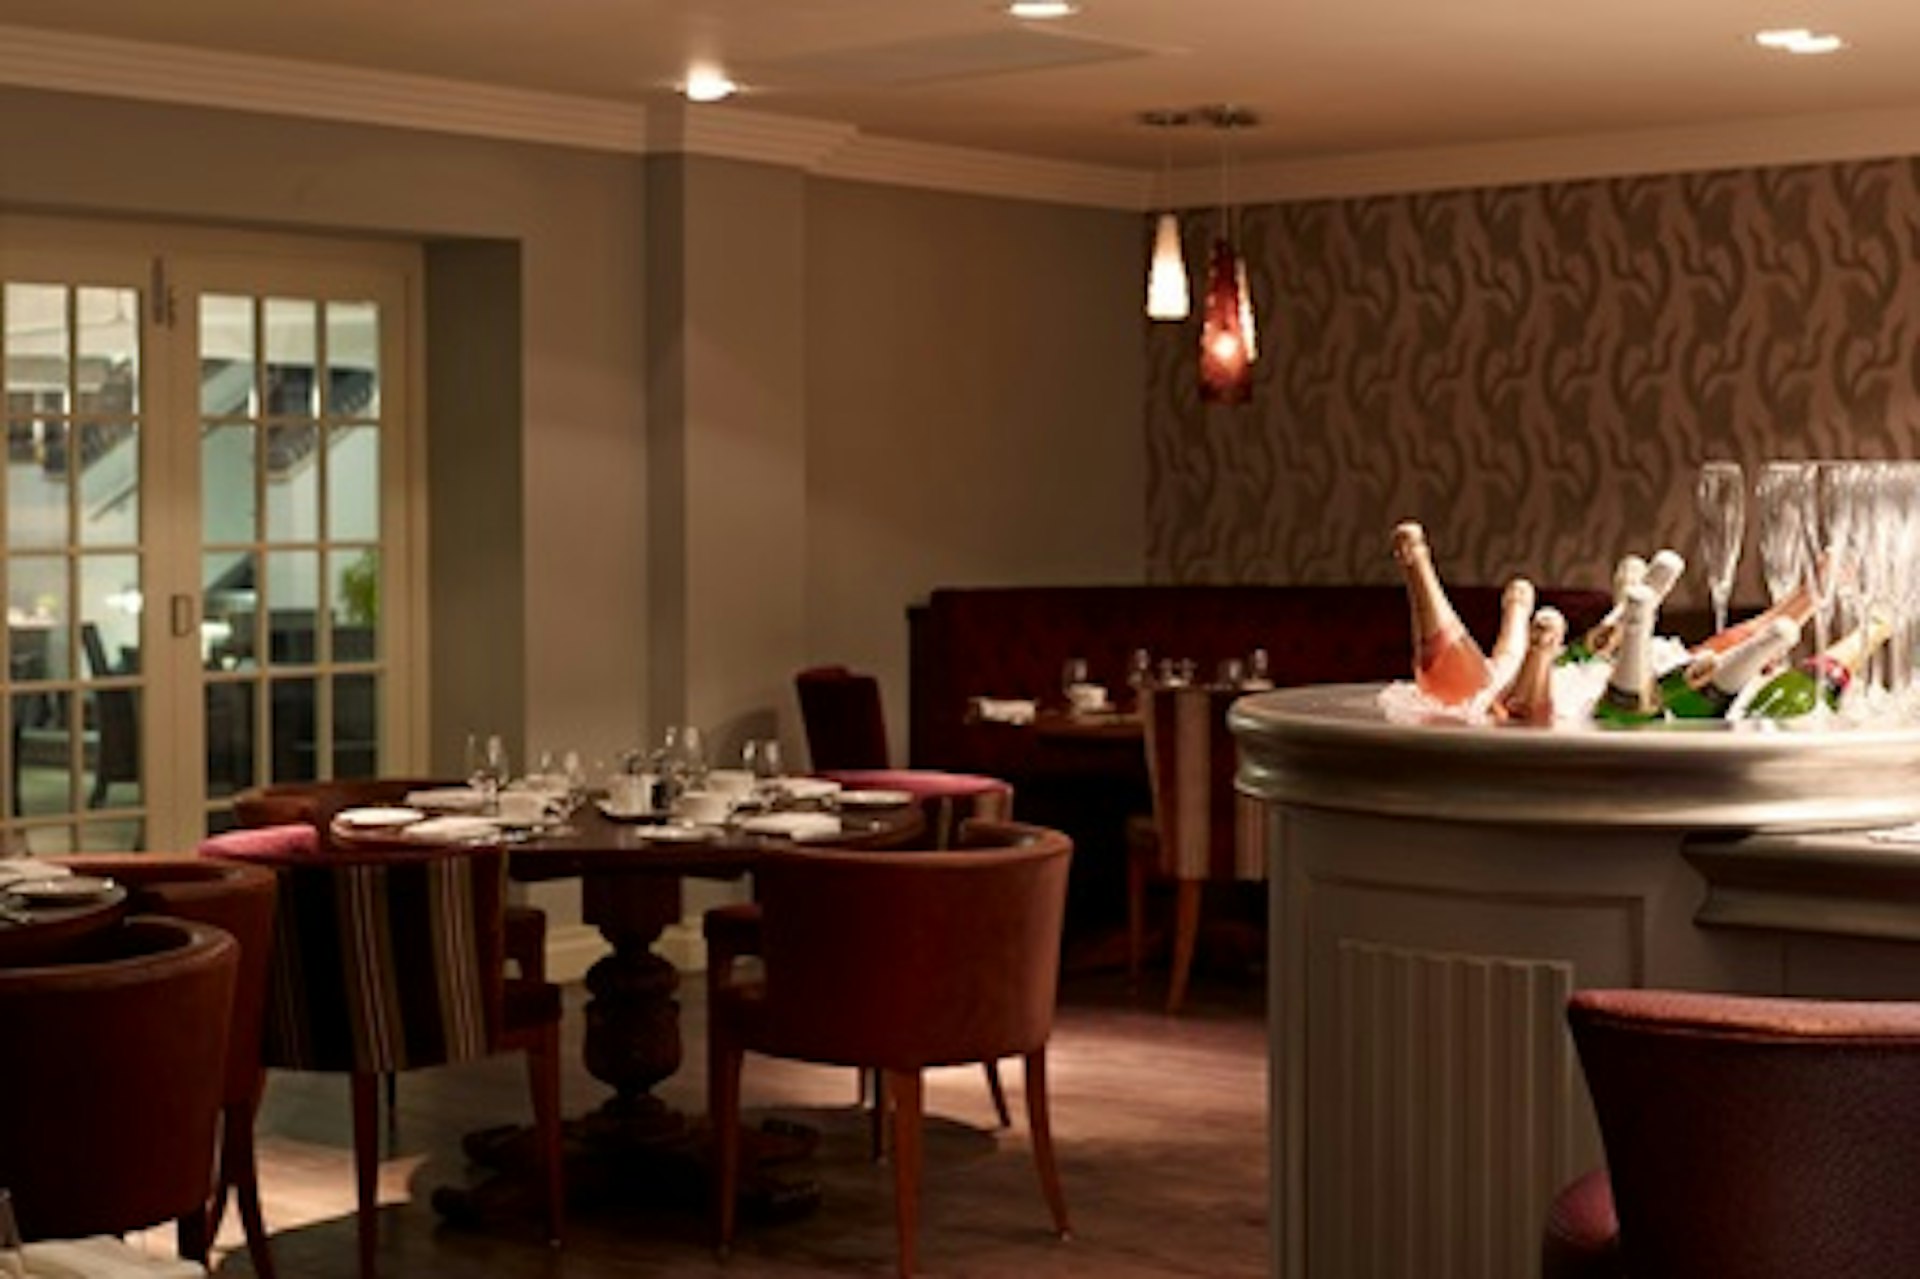 Afternoon Tea for Two at The Arden Hotel in Historic Stratford-upon-Avon 3